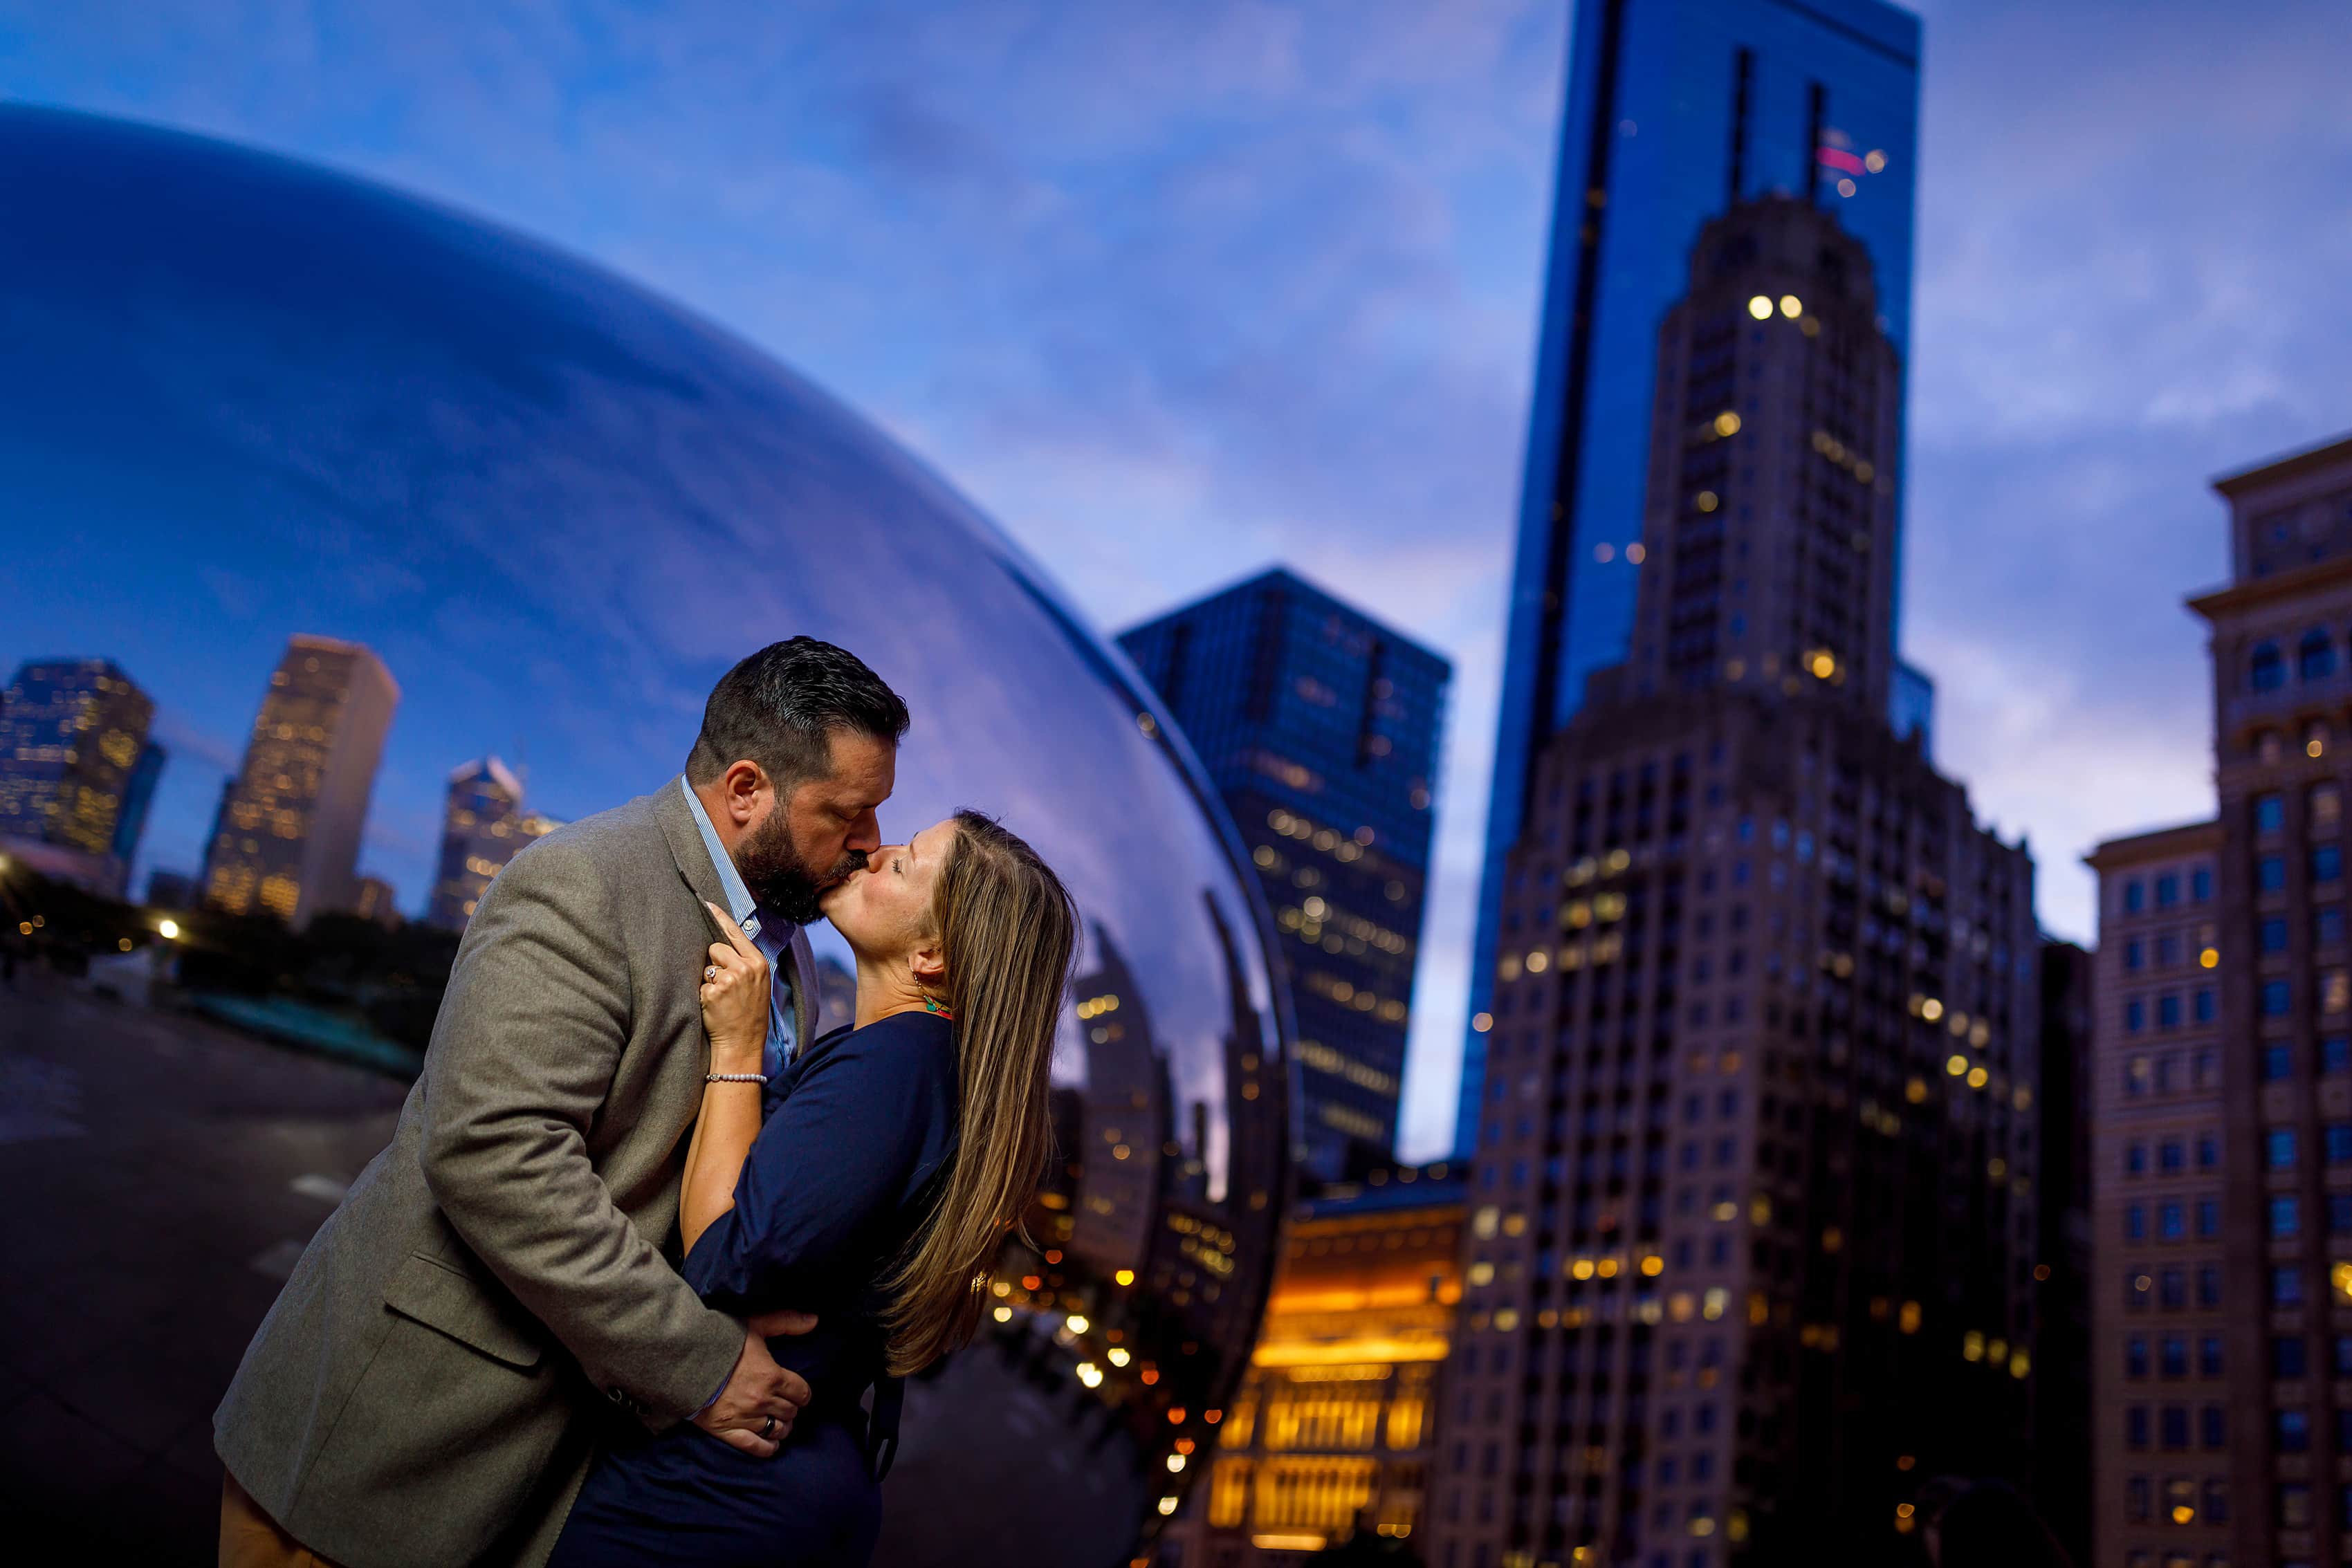 couple kisses during engagement session at Millennium Park with Cloudgate The Bean statue in the background and Chicago skyline